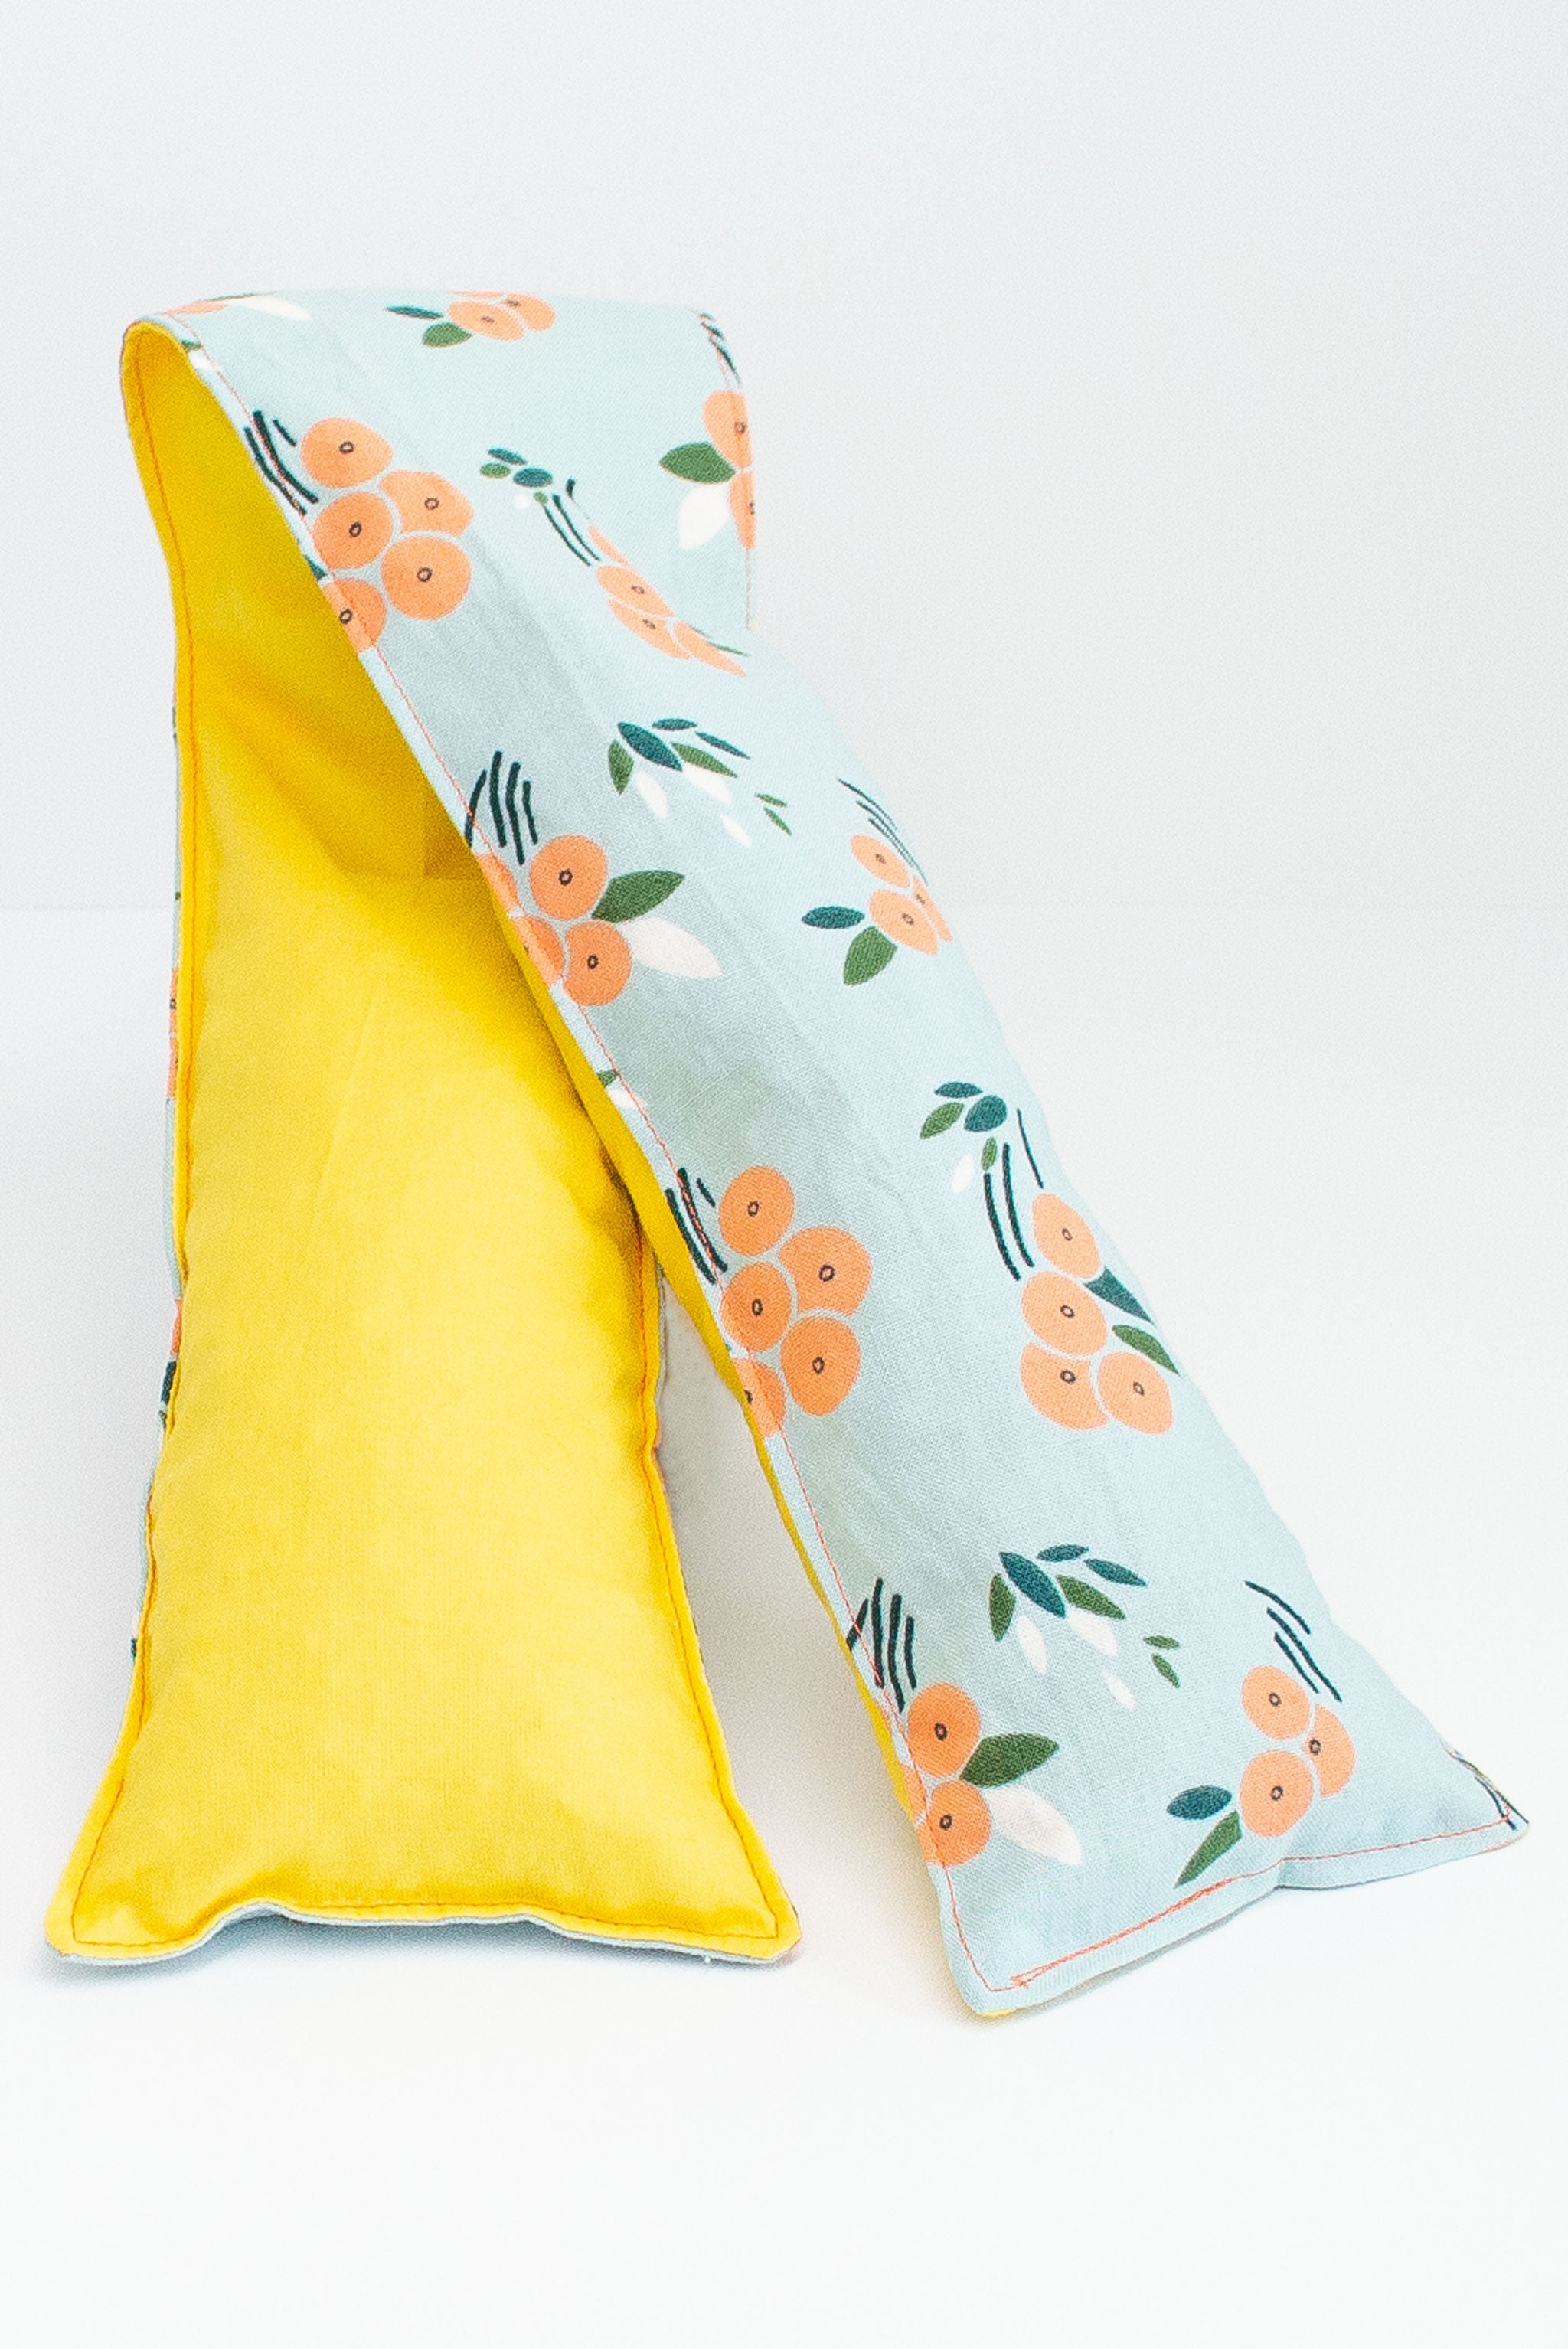 Long and skinny cherry pit grain bag on white background. Half yellow, half peach floral print on blue background. 